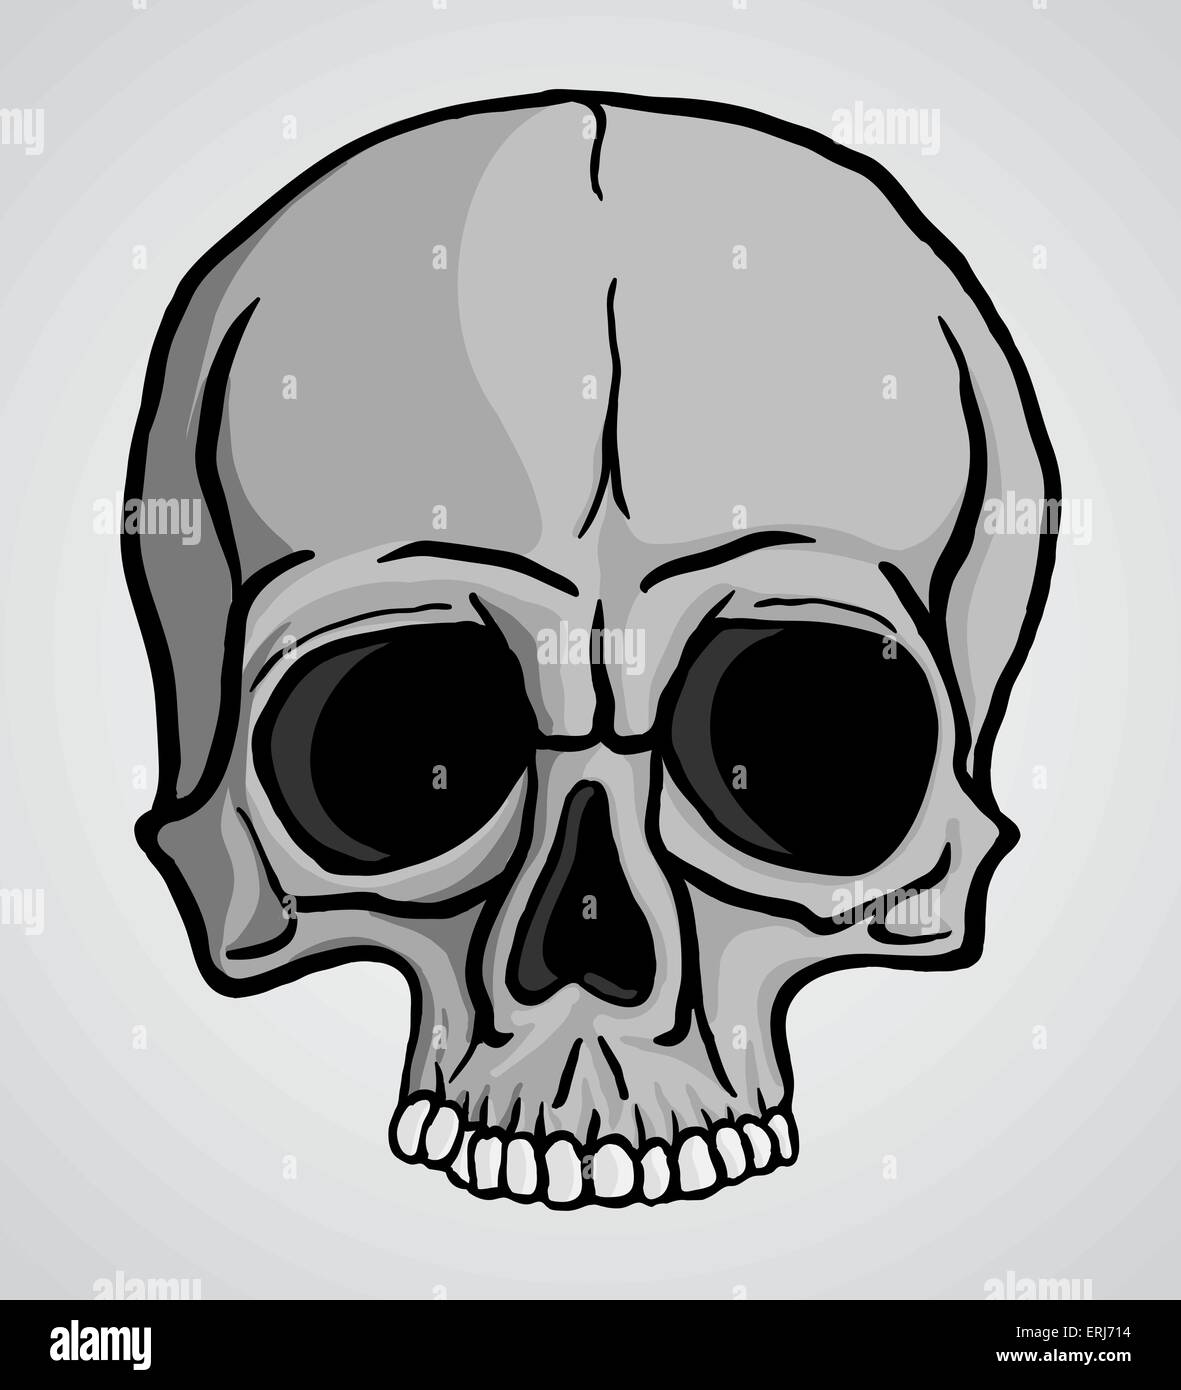 Human skull over gray background. Freehand drawing.Vector illustration. Stock Vector